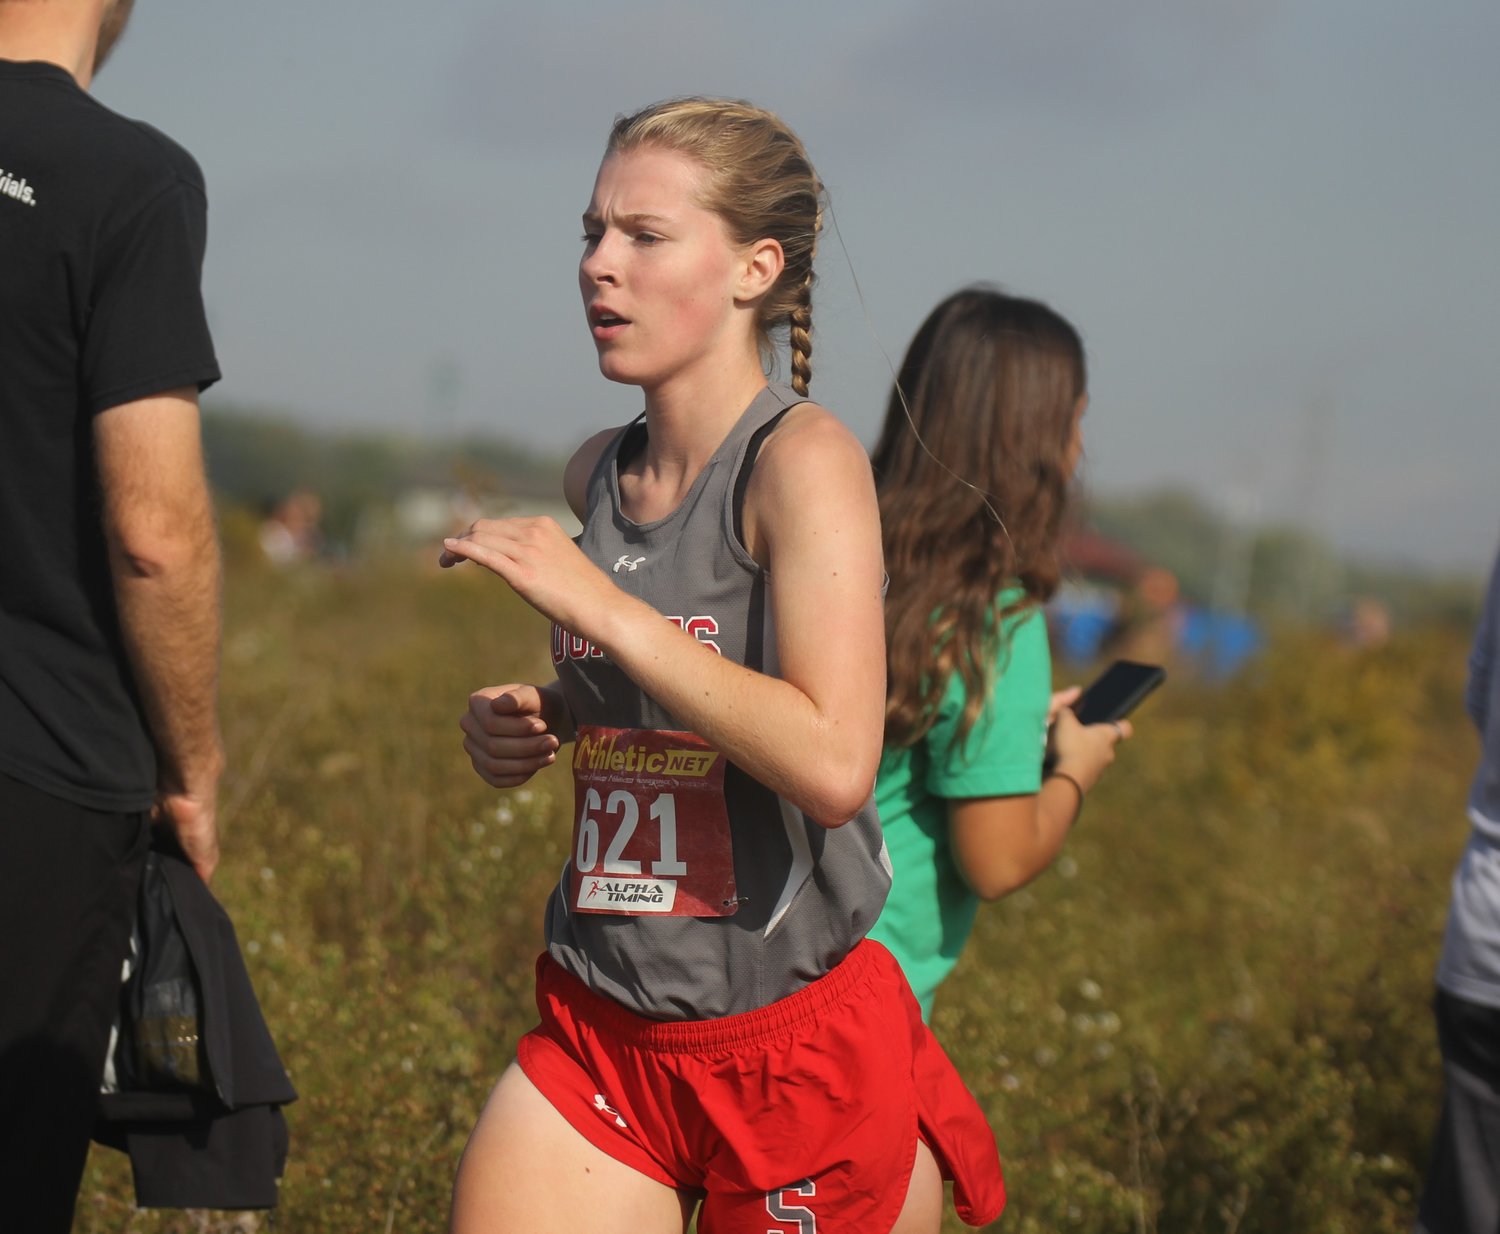 Southmont's Faith Allen will look to break through and qualify for the State Finals in her senior season.